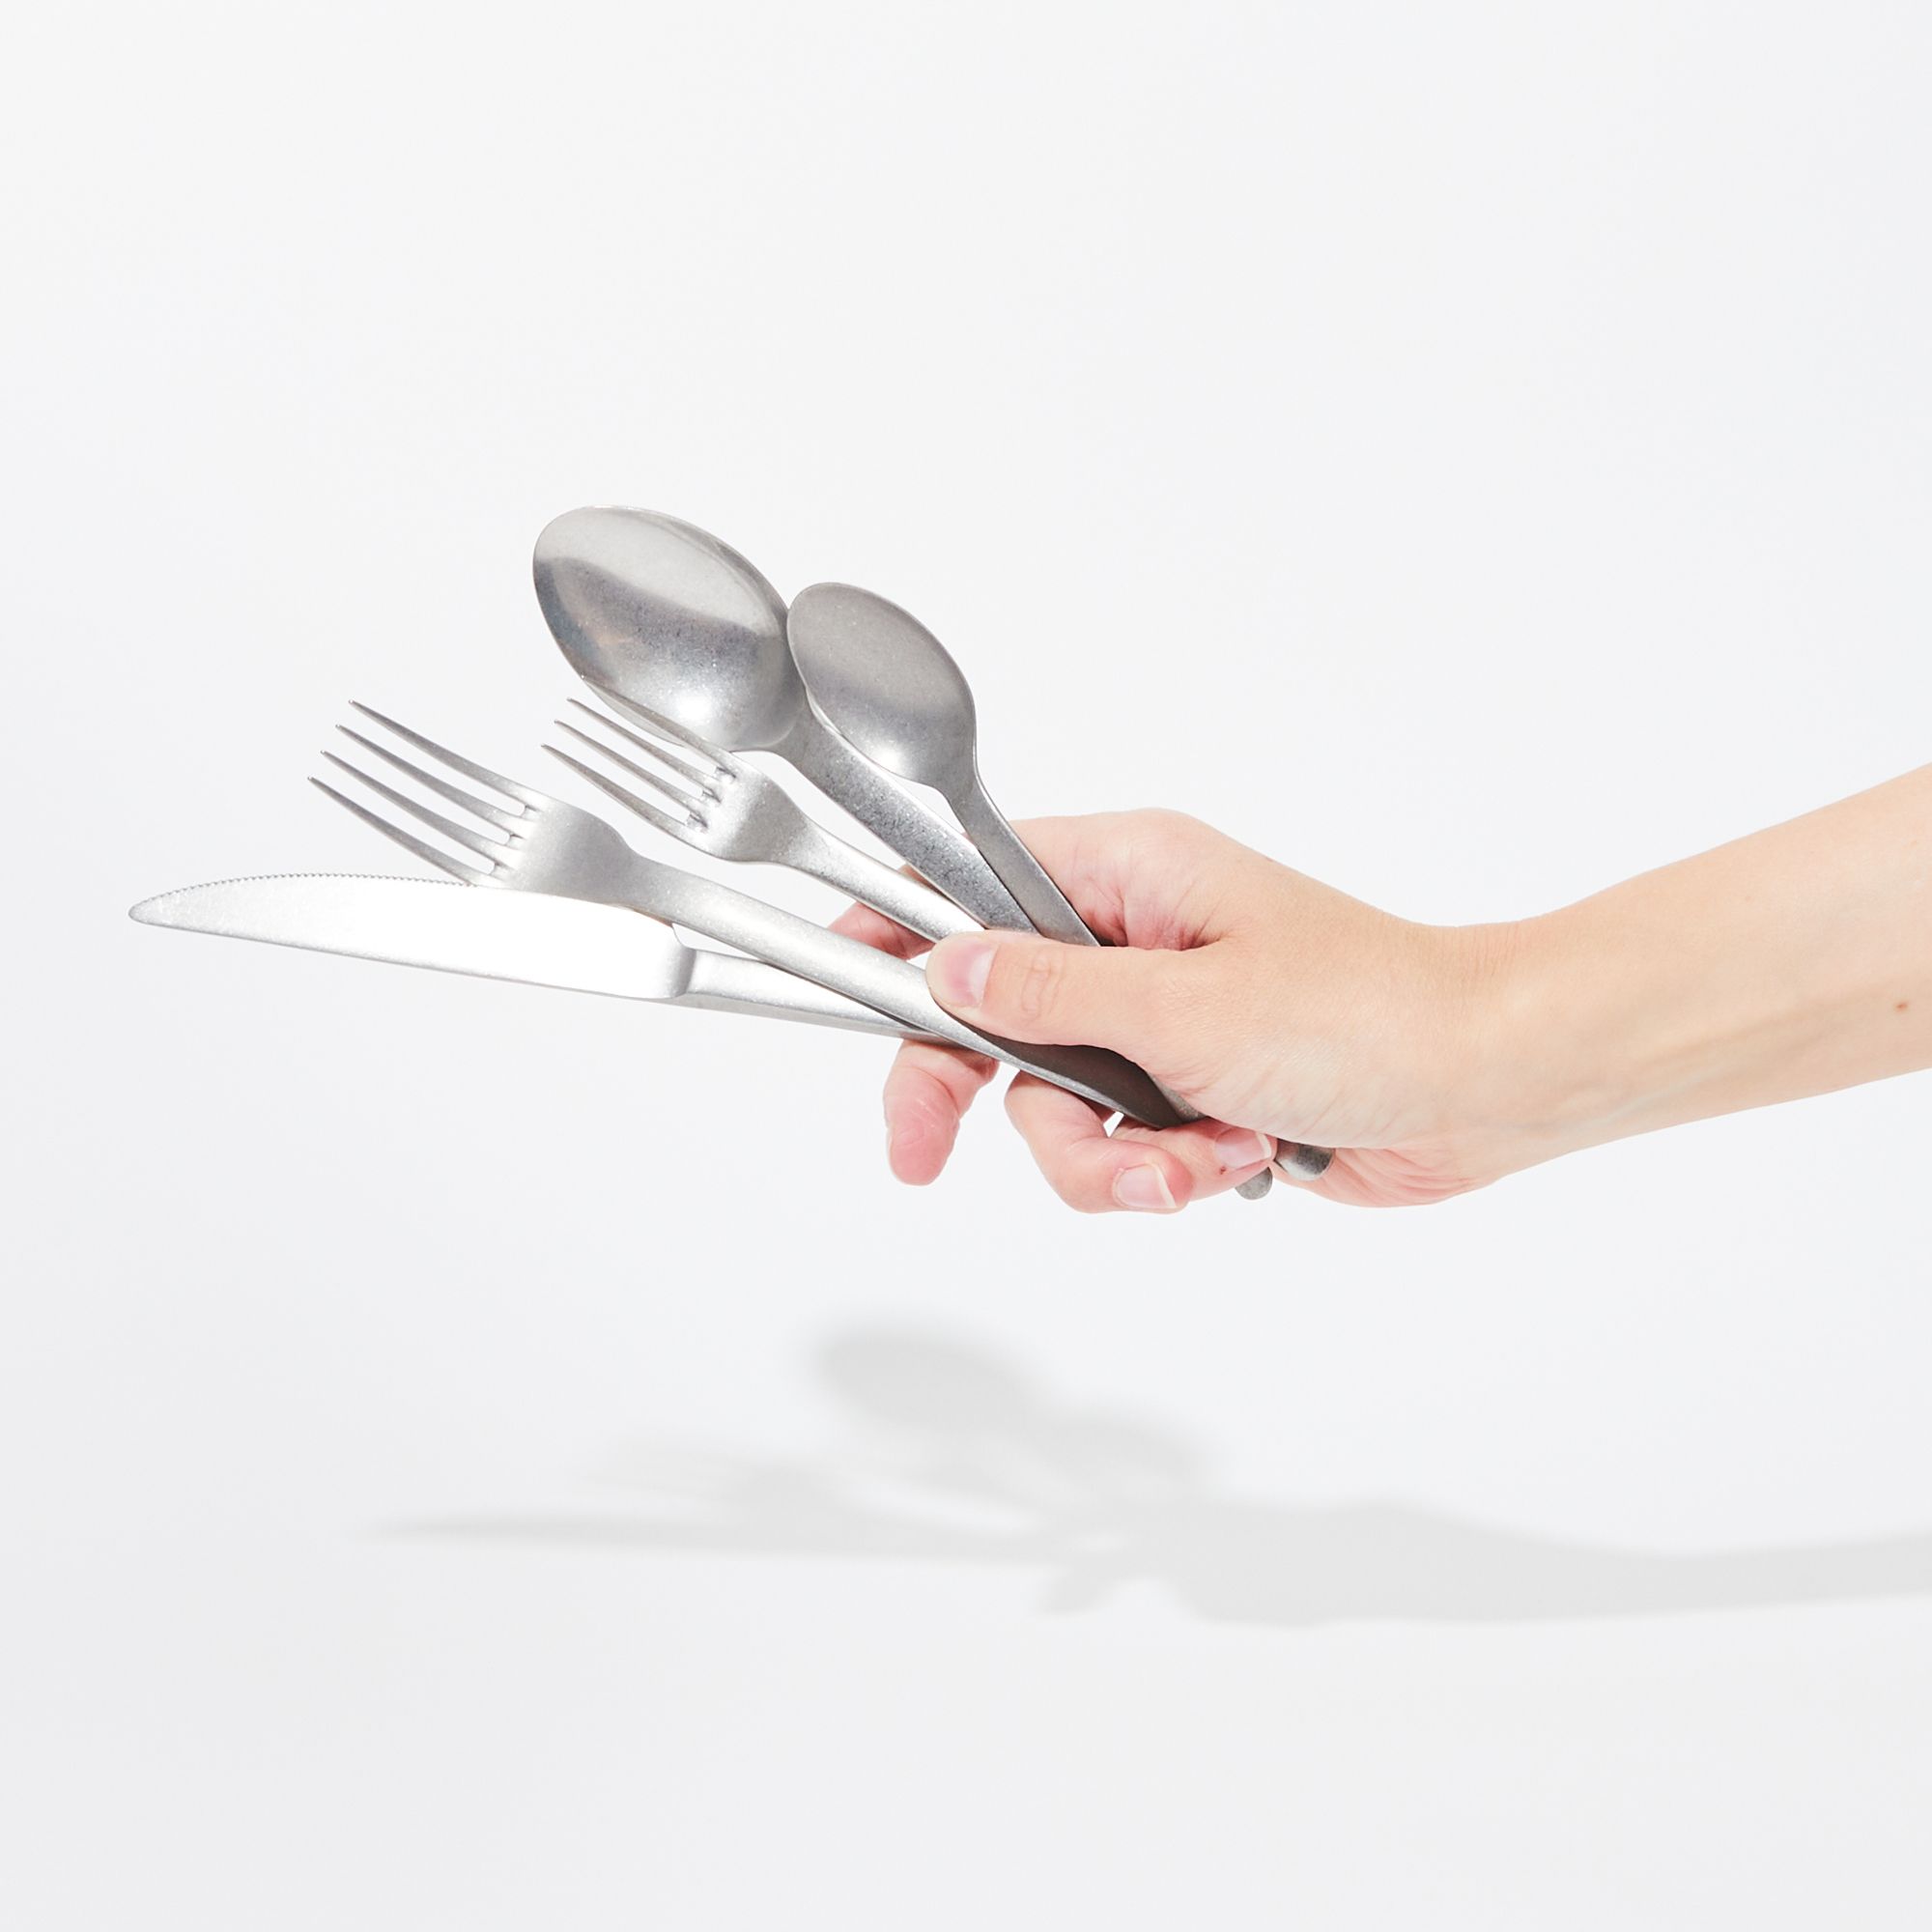 Hand holding Stainless steel flatware